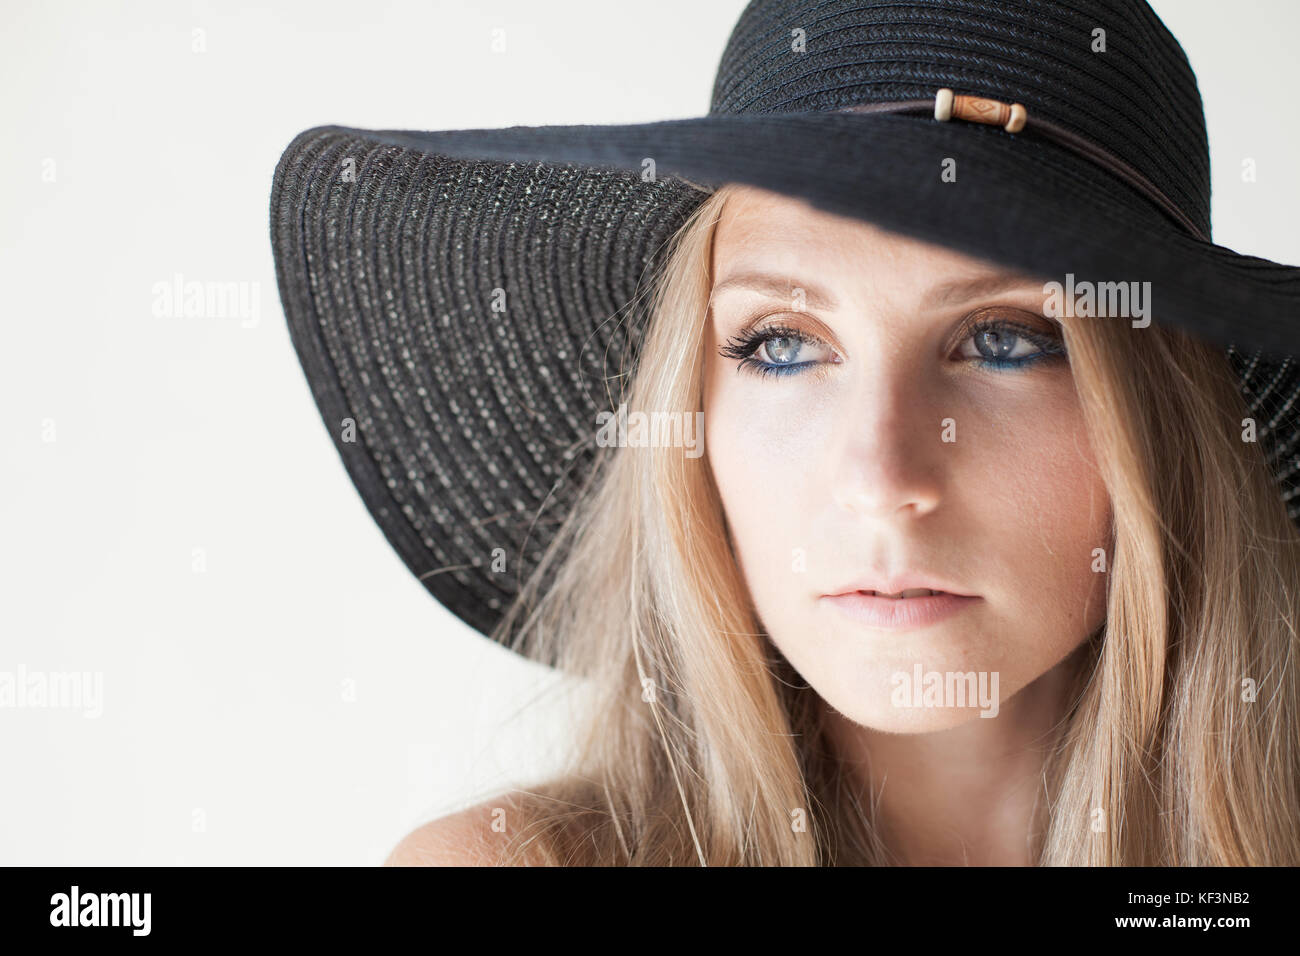 fashionable girl in a hat with a brim poses for advertising Stock Photo